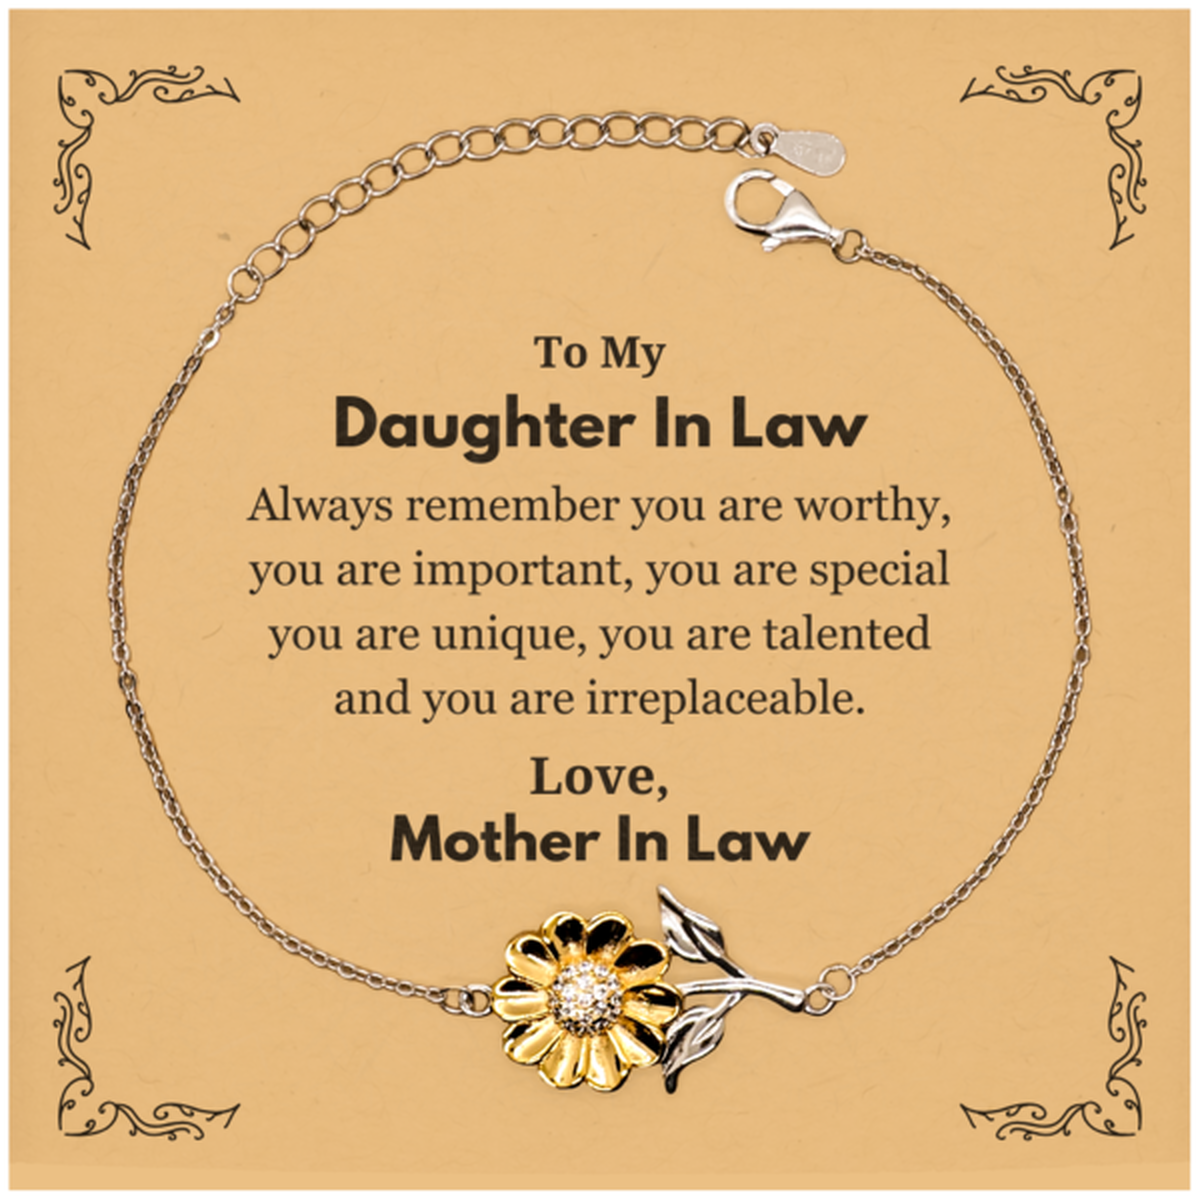 Daughter In Law Birthday Gifts from Mother In Law, Inspirational Sunflower Bracelet for Daughter In Law Christmas Graduation Gifts for Daughter In Law Always remember you are worthy, you are important. Love, Mother In Law